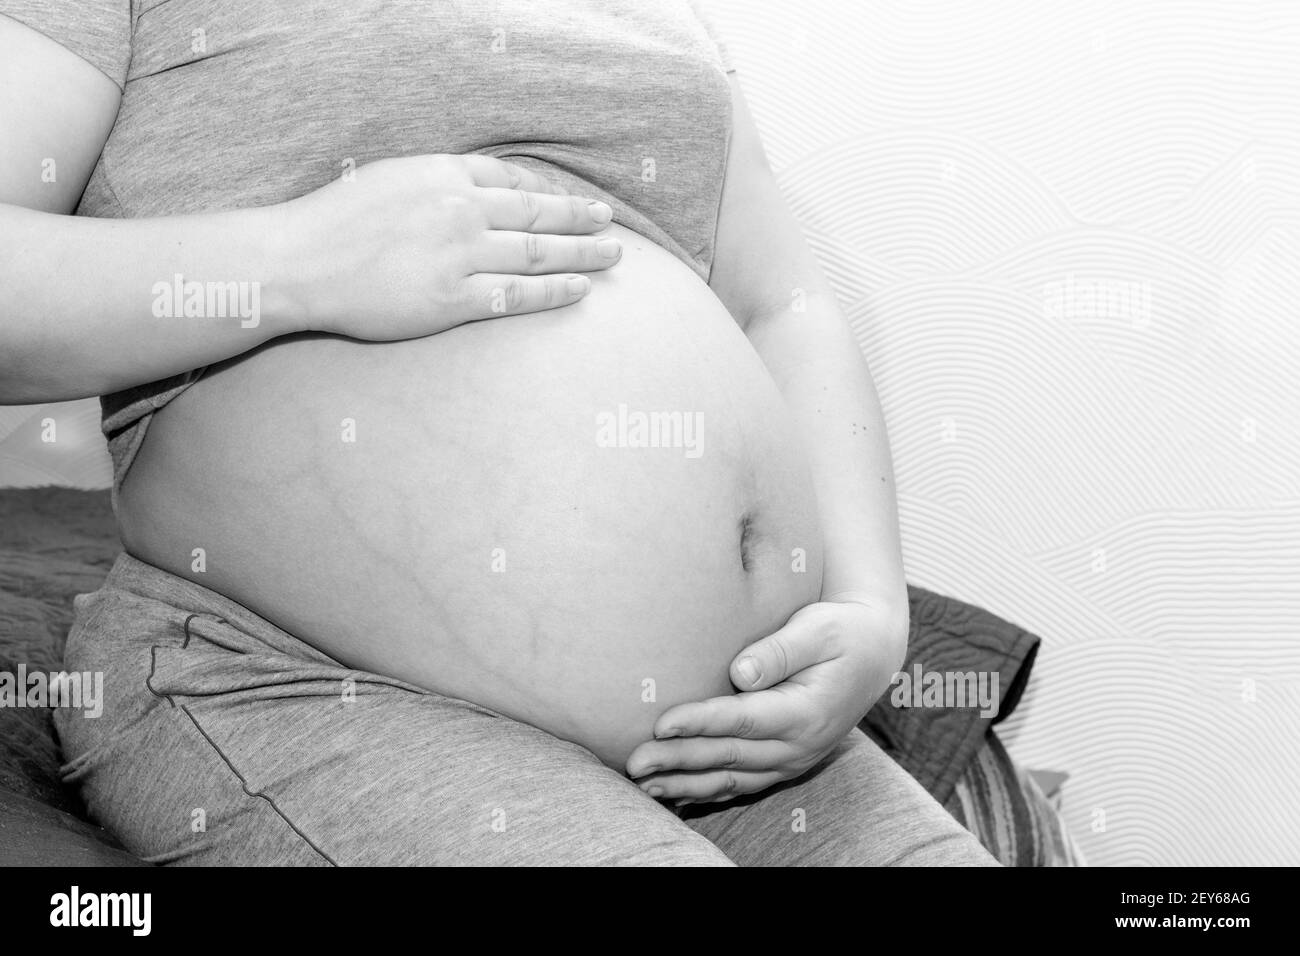 Happy motherhood concept. Female hands hold the belly of a pregnant woman, close-up, black and white. Concept about pregnancy and birth. Stock Photo